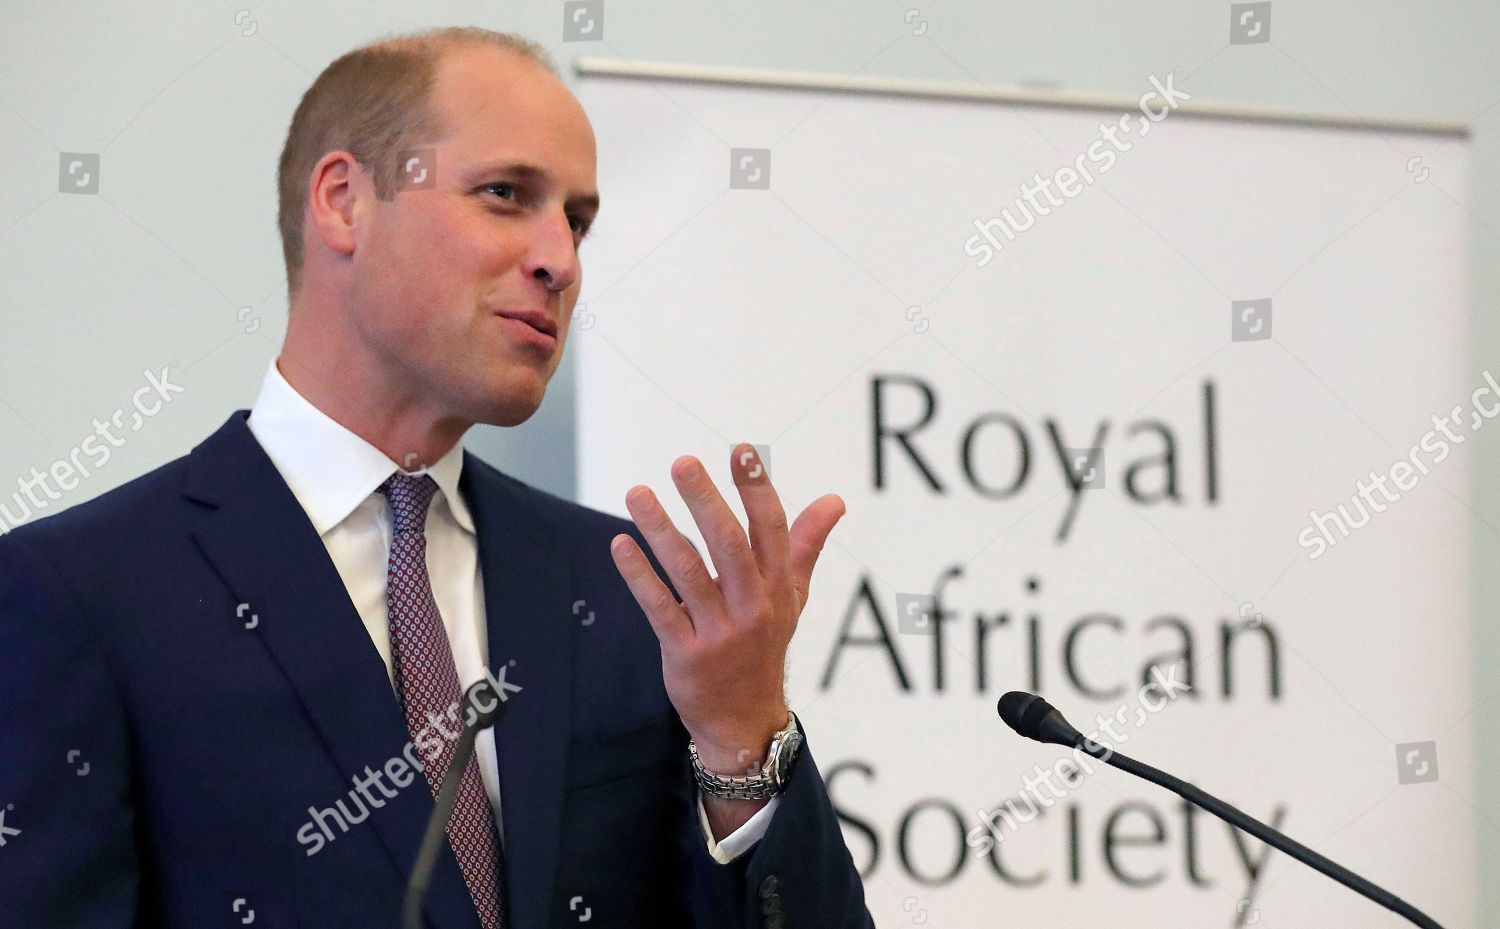 prince-william-attends-royal-african-society-reception-london-uk-shutterstock-editorial-9880610g.jpg